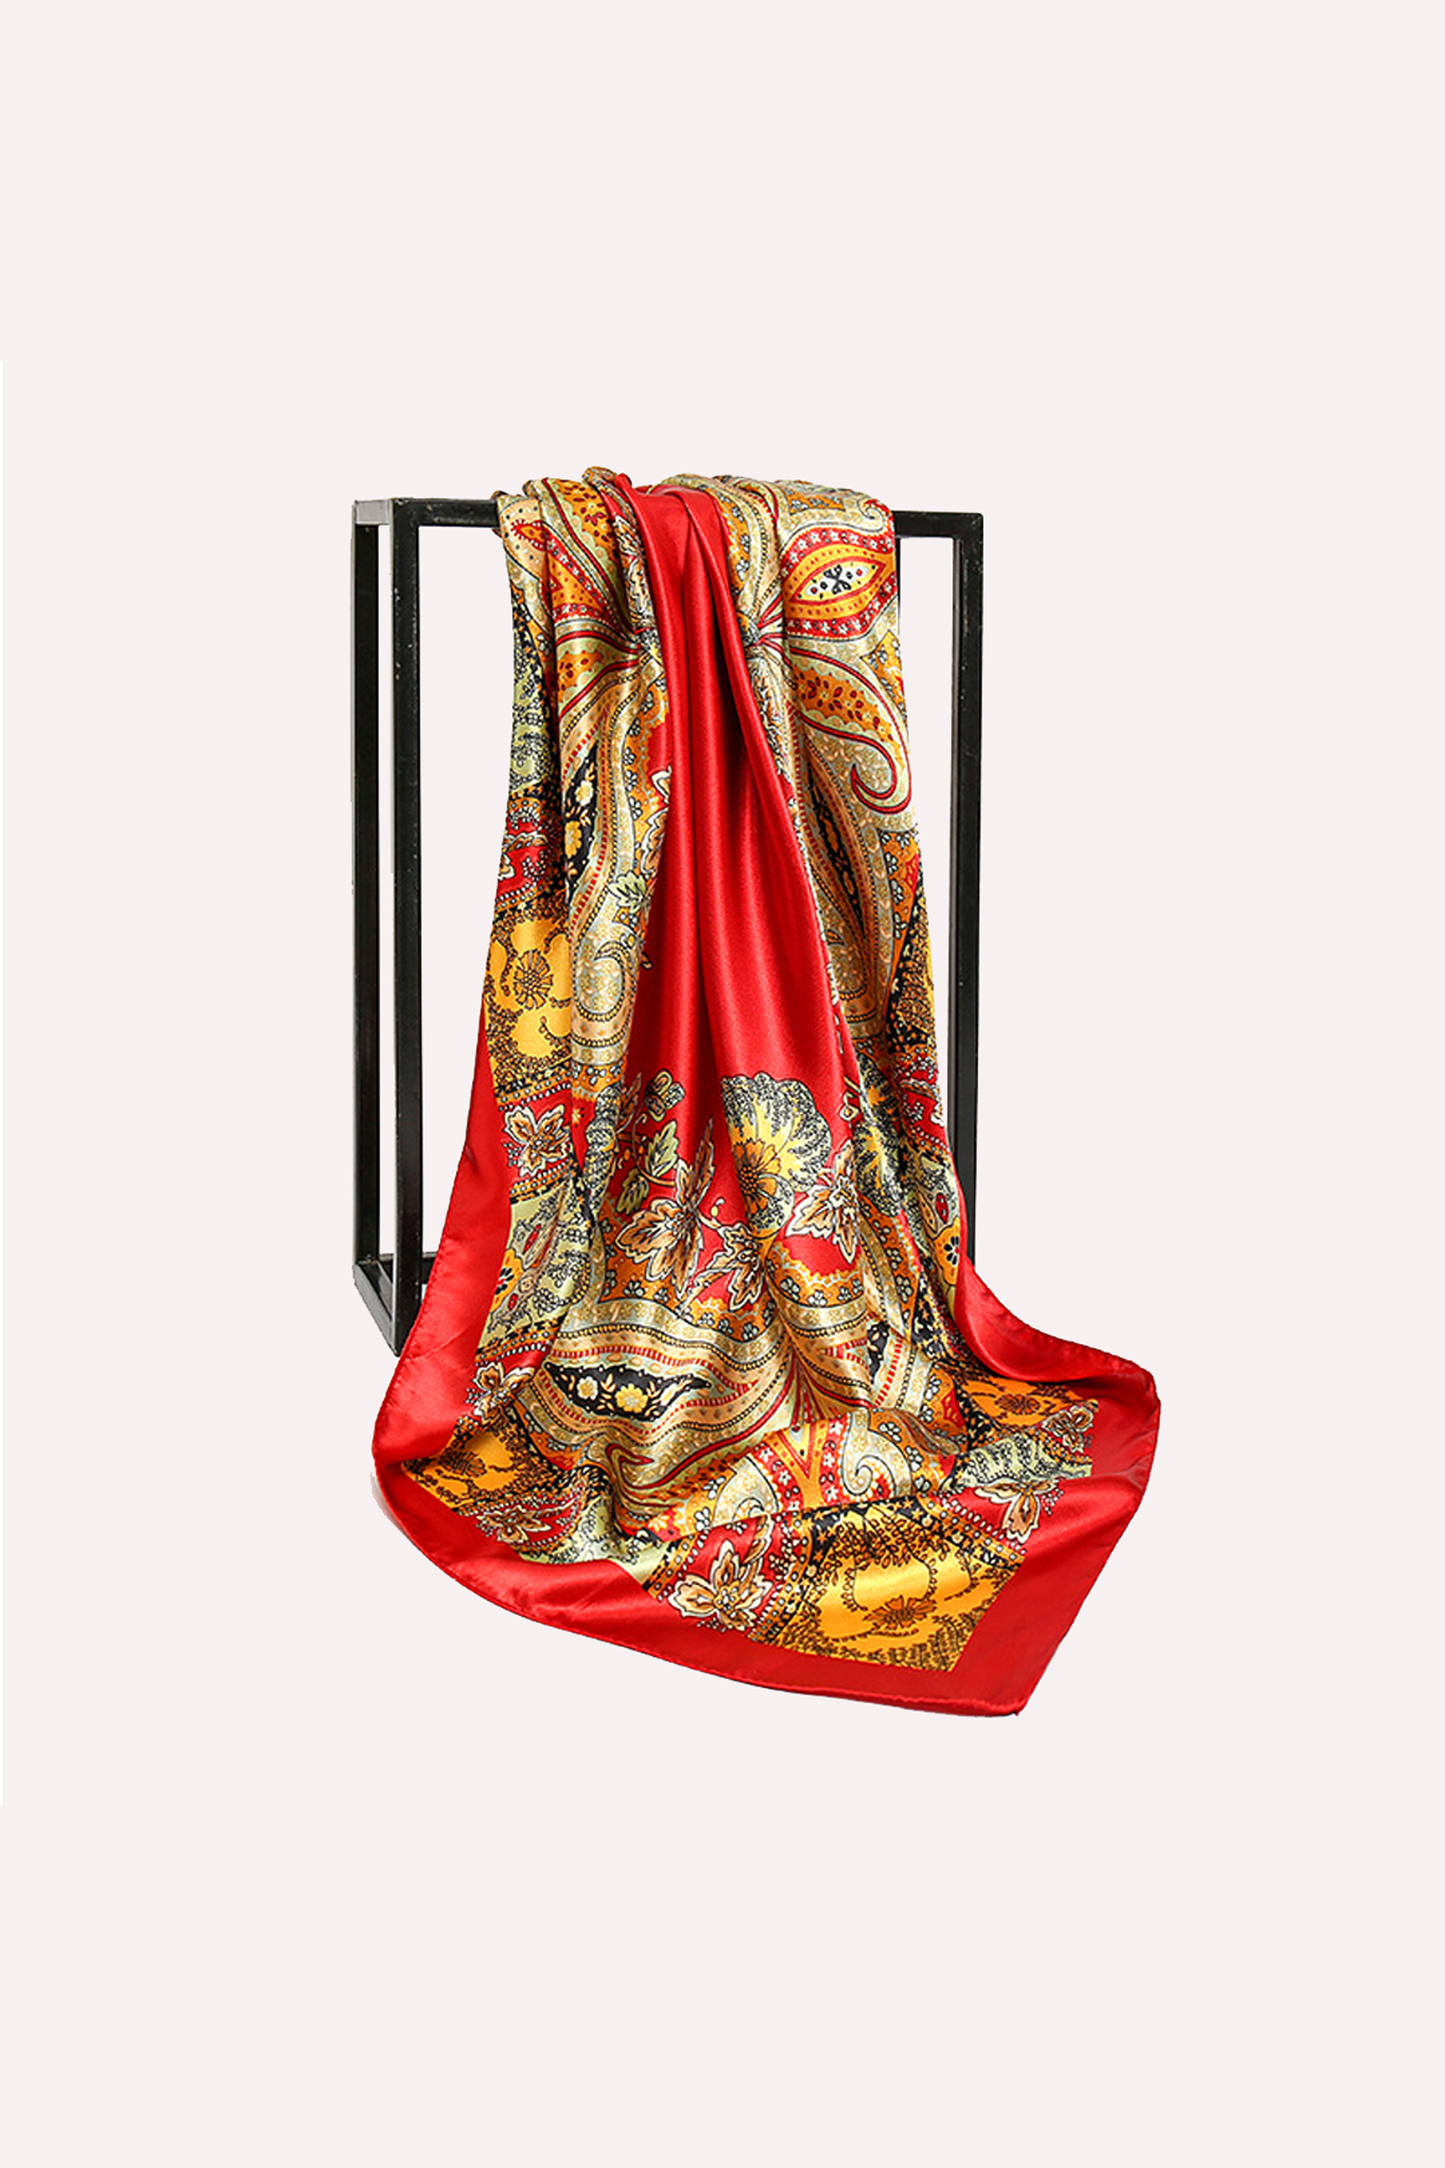 ladies scarves for women, online scarves shopping in Pakistan 